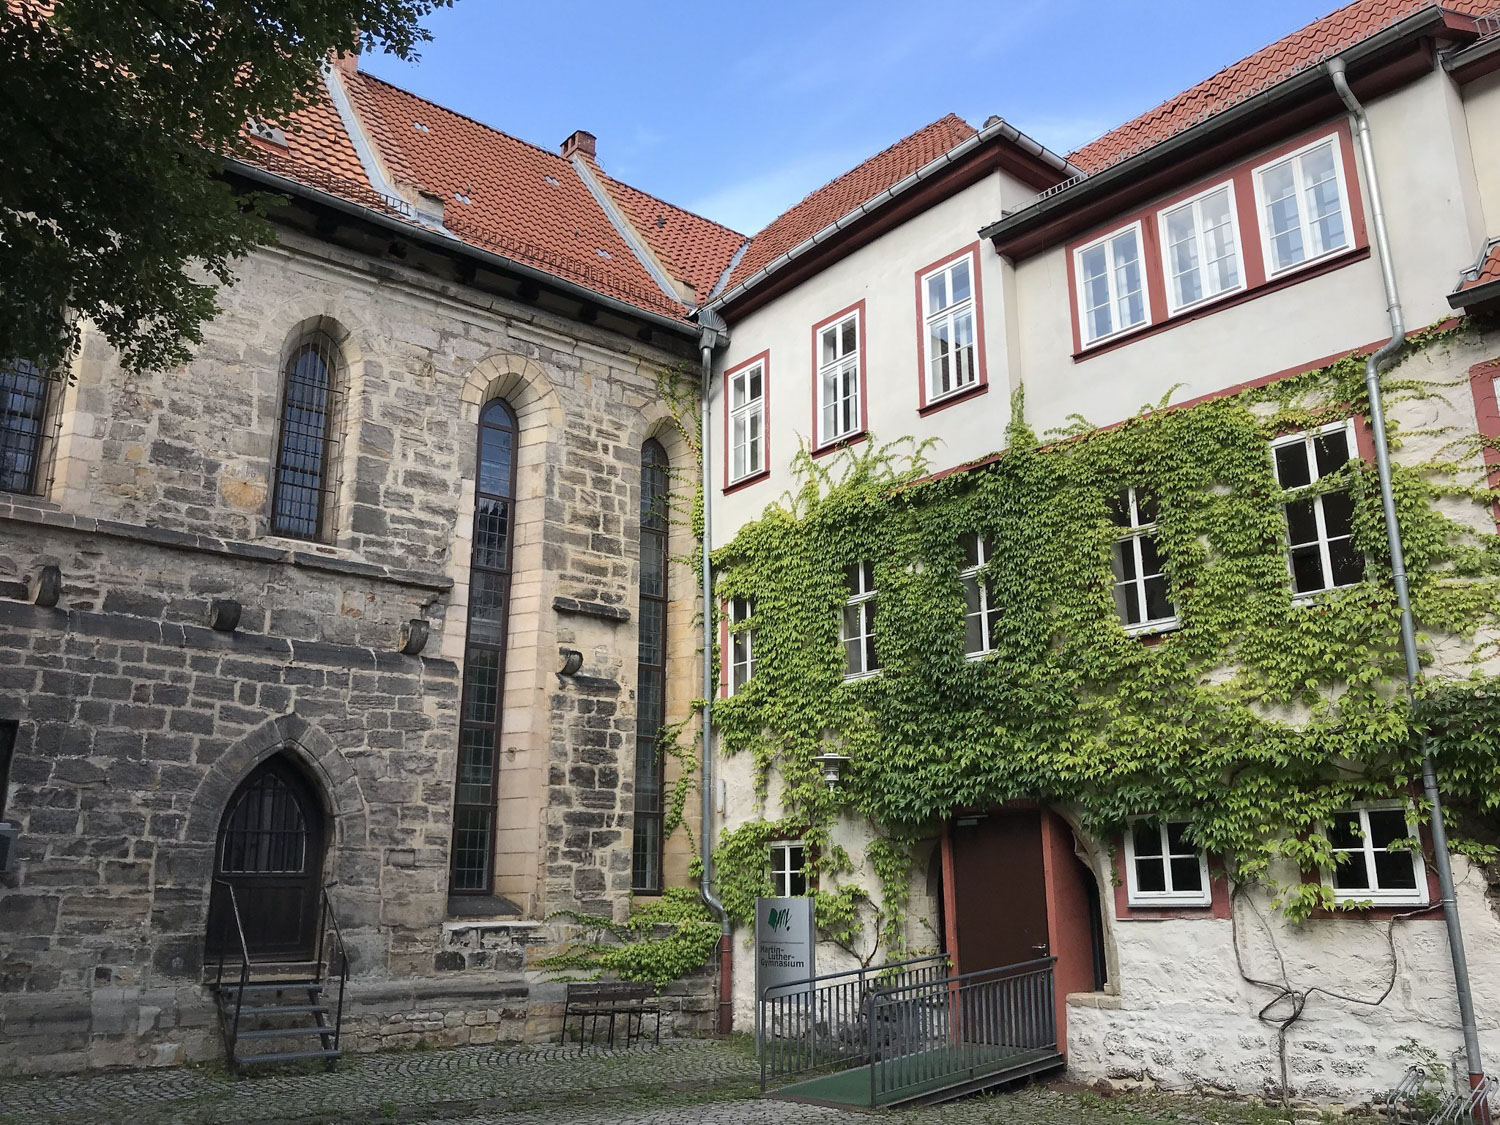 School in Eisenach where Luther studied